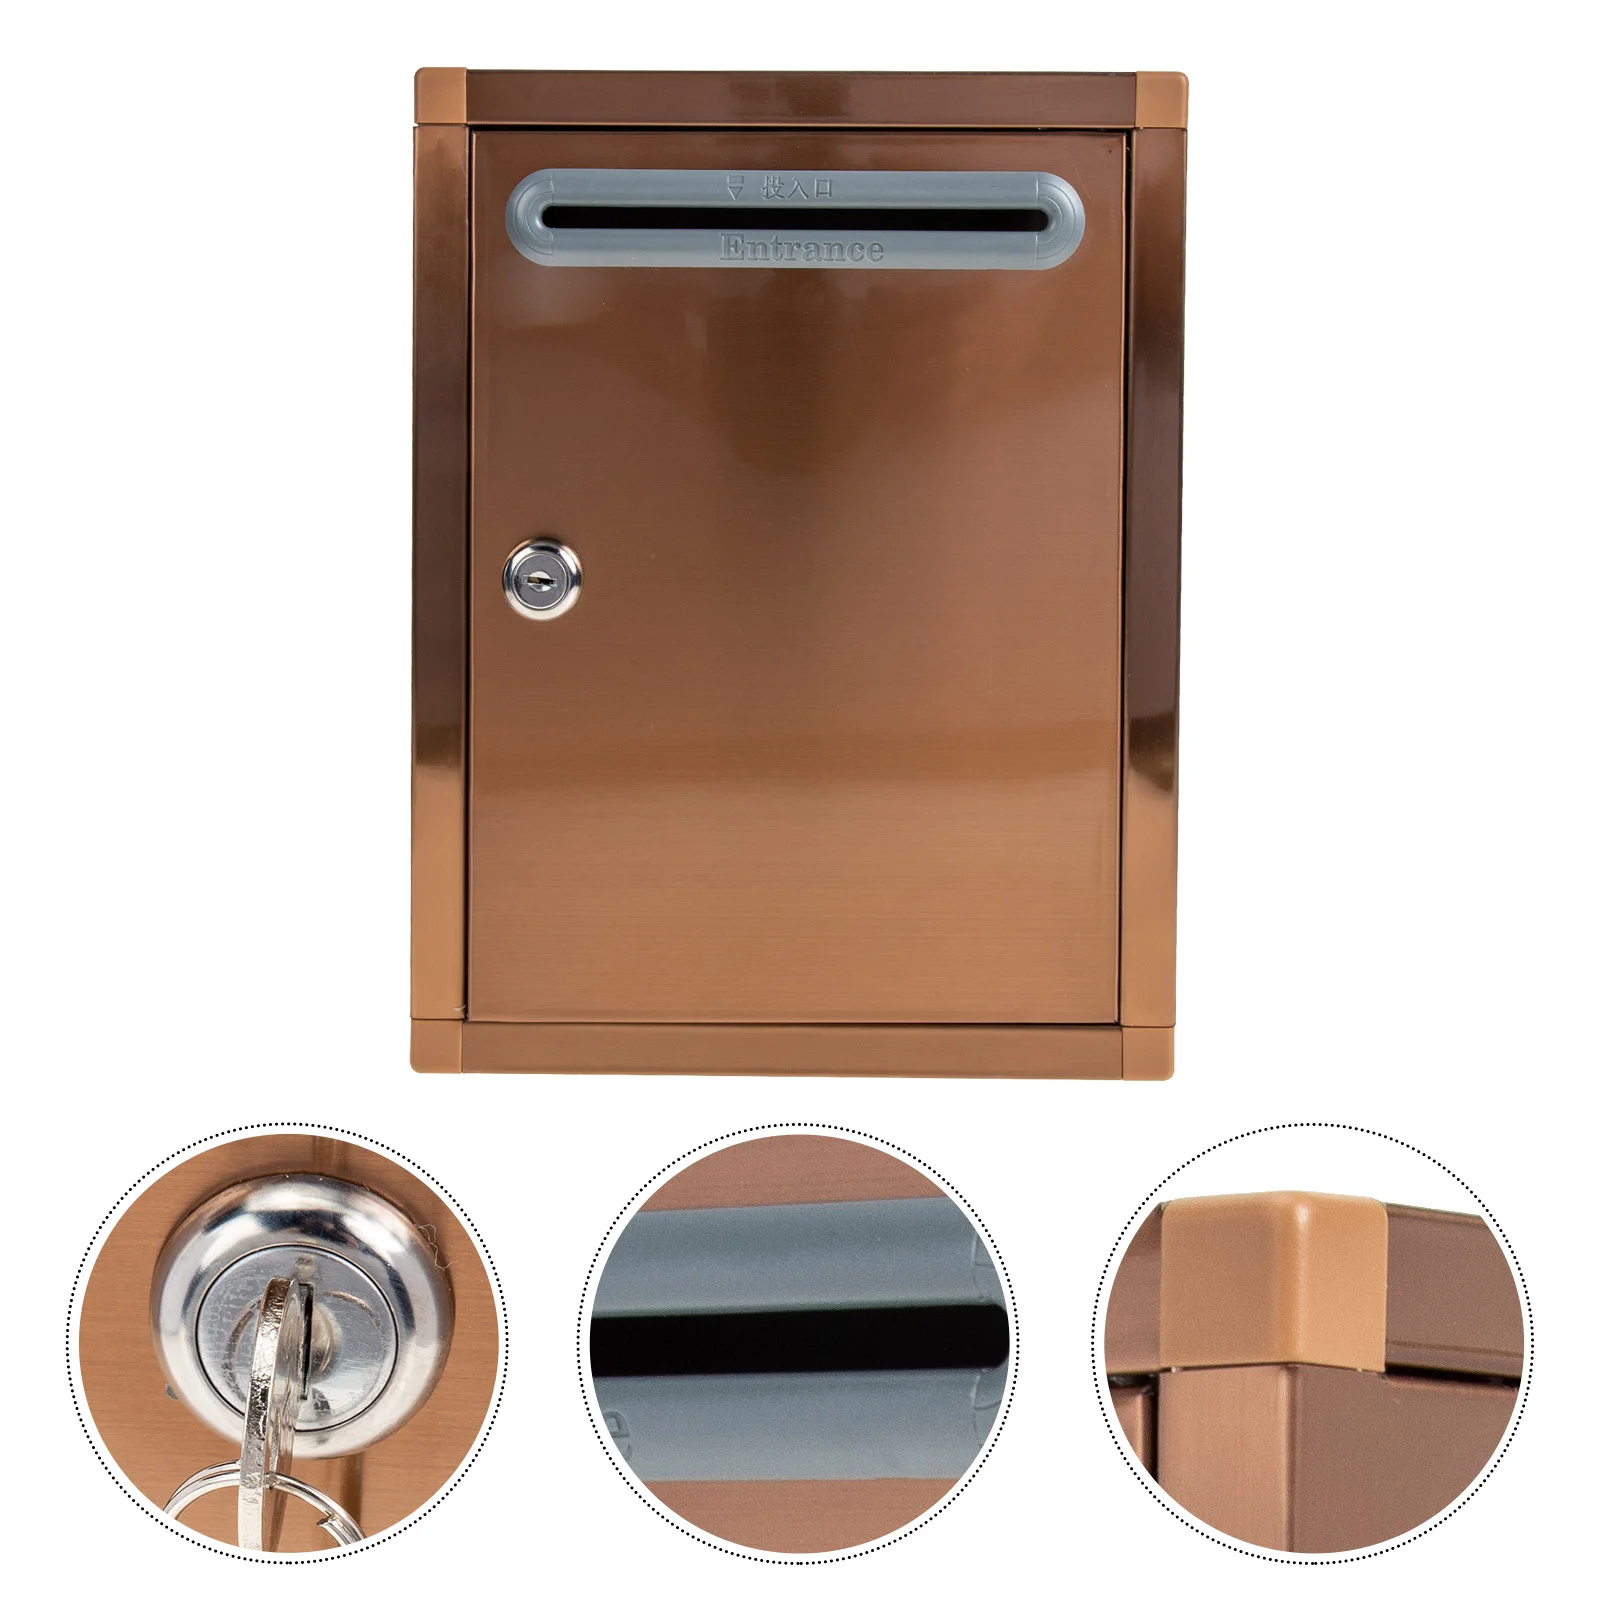 

Ballot Box Lockable Letterbox Wall Mount Mailbox Office Supply Mounted Stainless Steel Hanging